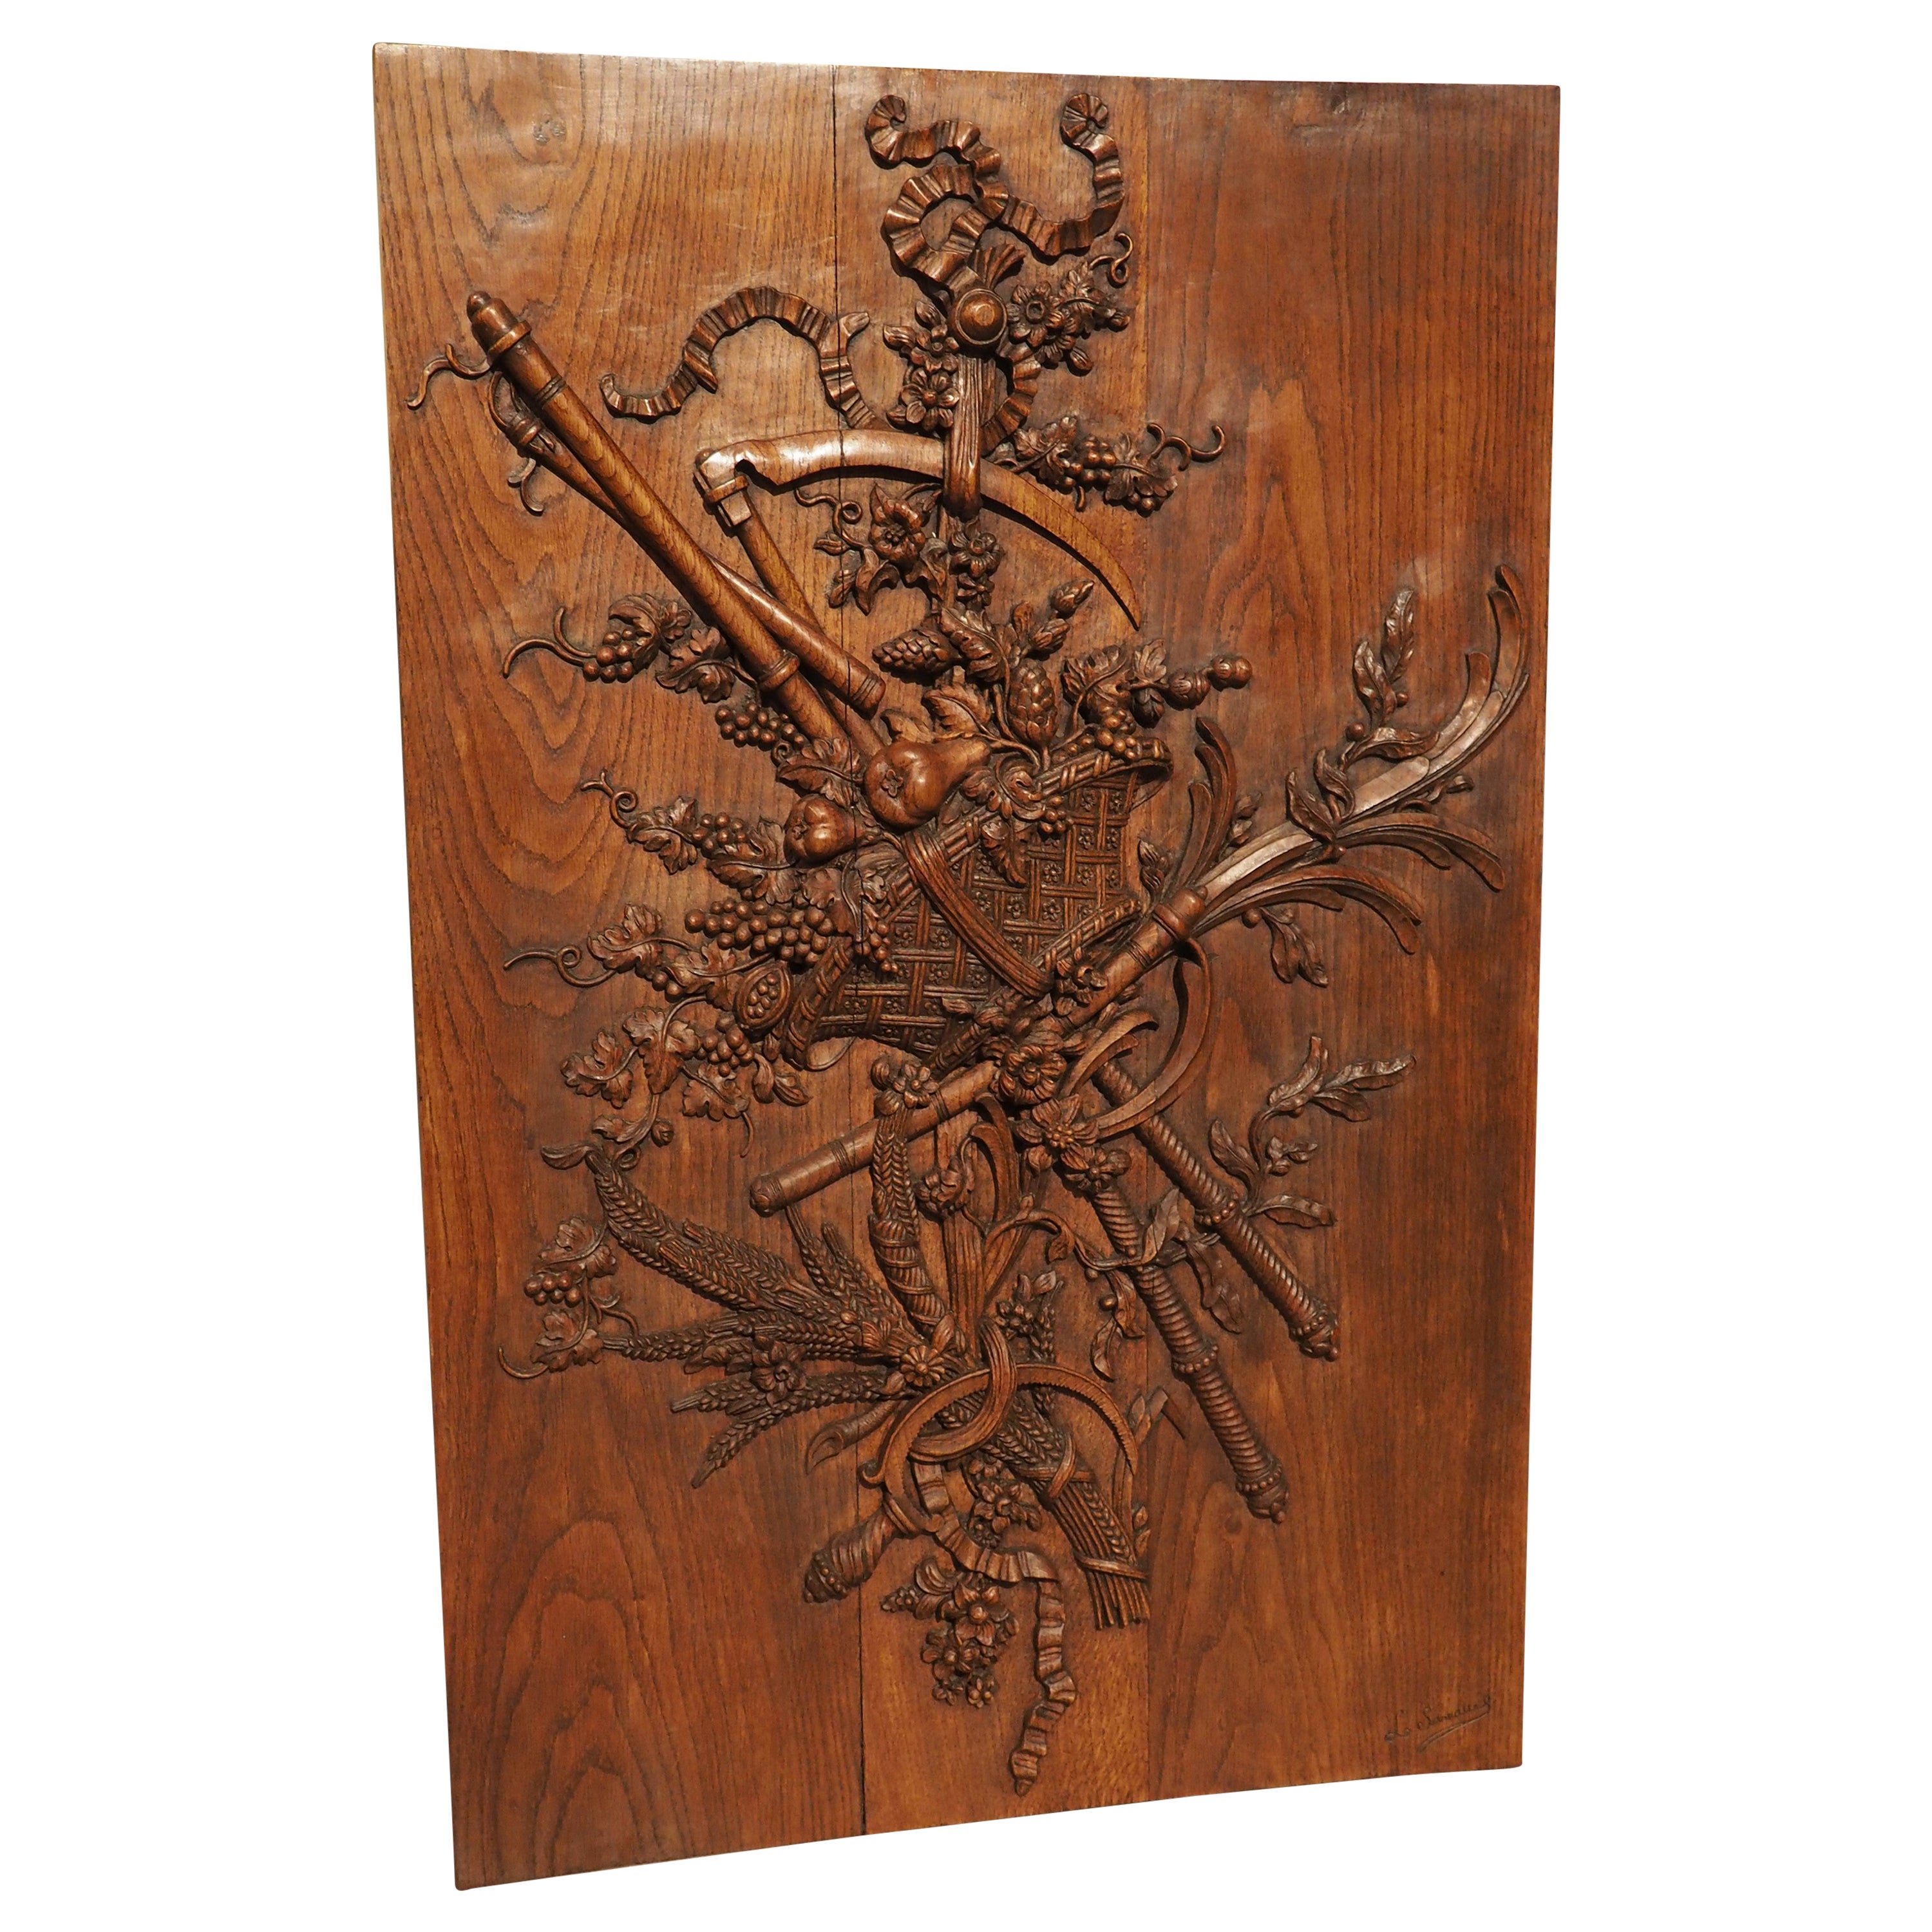 French Louis XVI Style Bas Relief Carved Oak Panel, Attributes of Agriculture